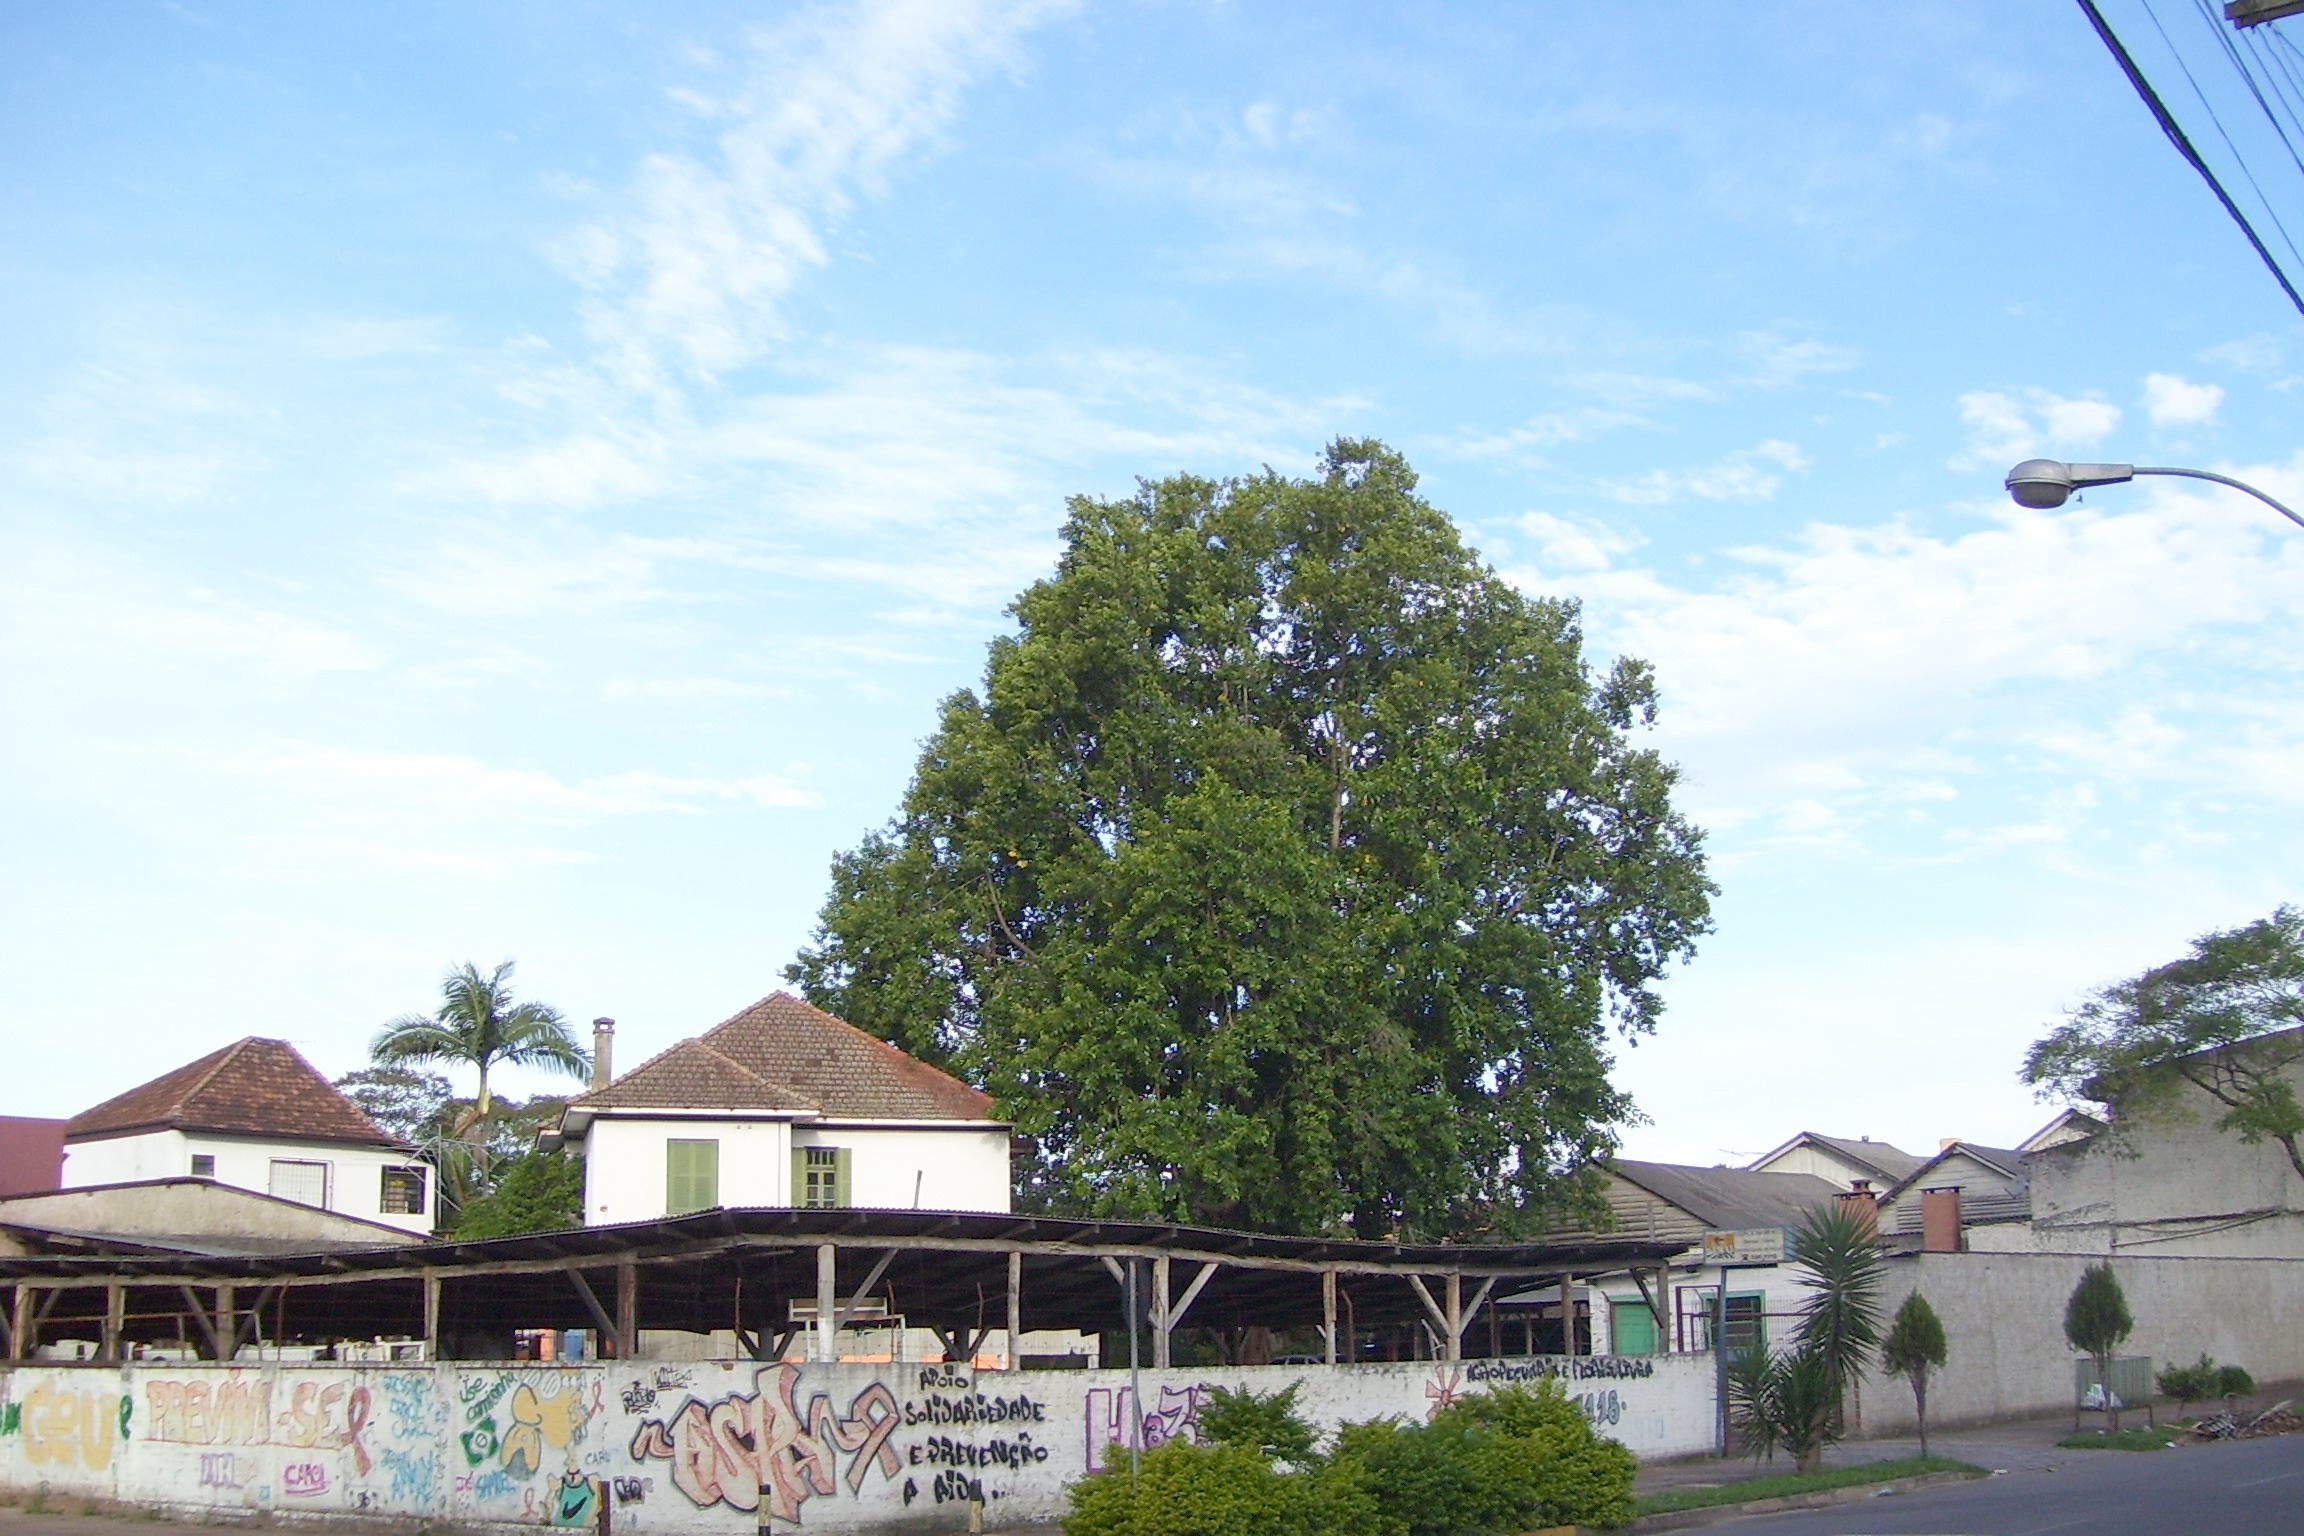 an outdoor food stand with graffiti in the foreground